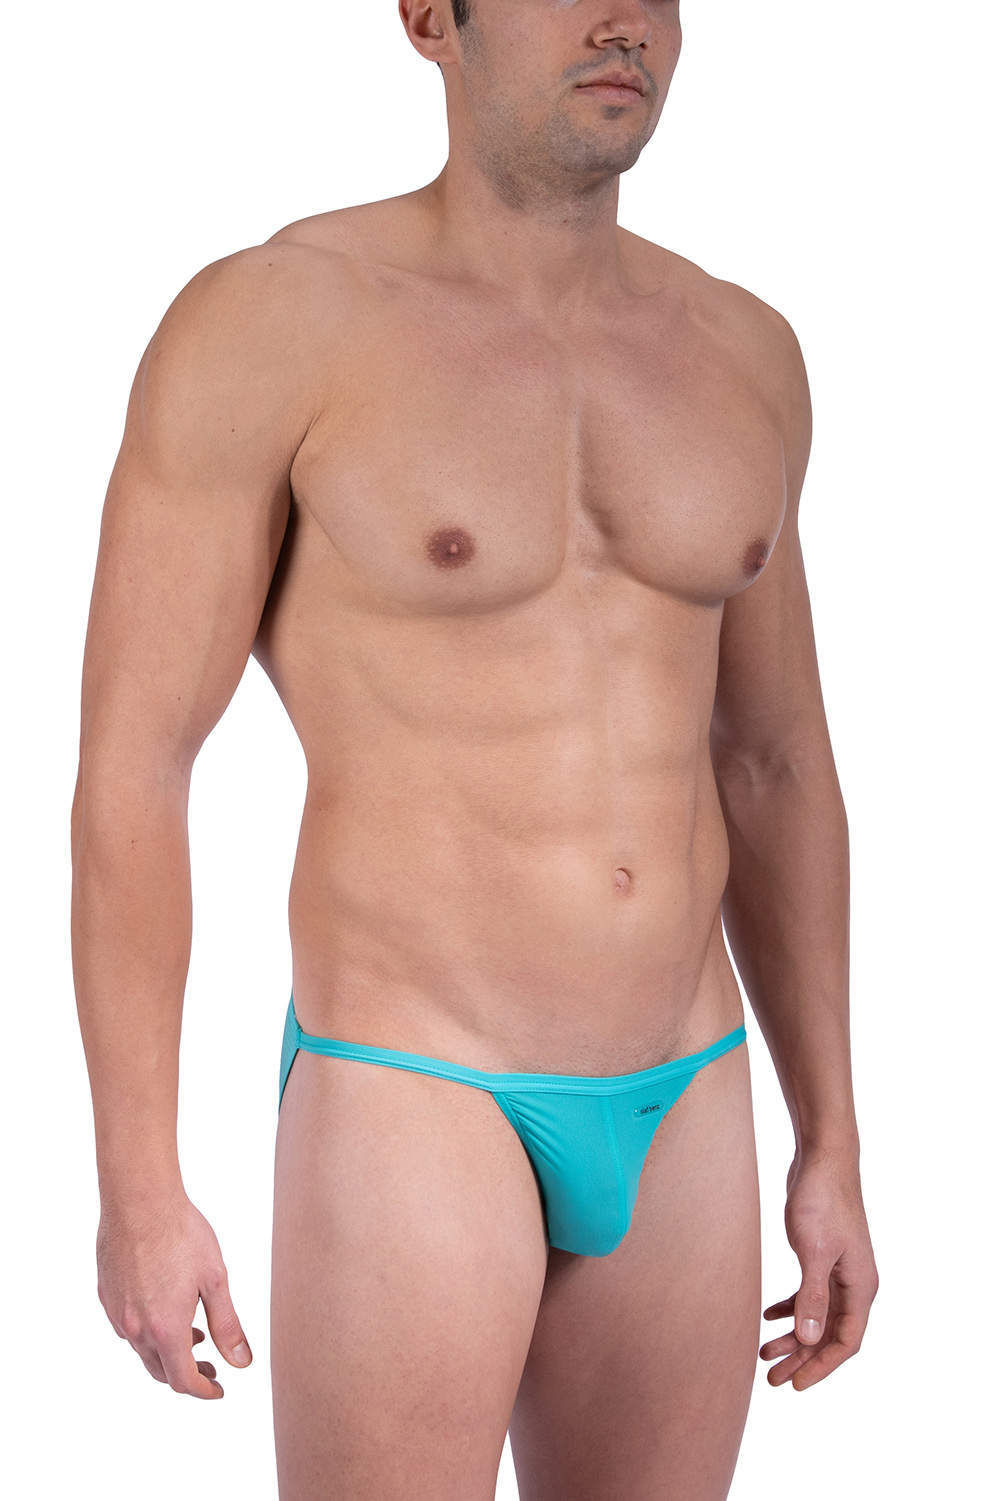 Olaf Benz RED 0965 Rio Tanga Briefs - Turquoise